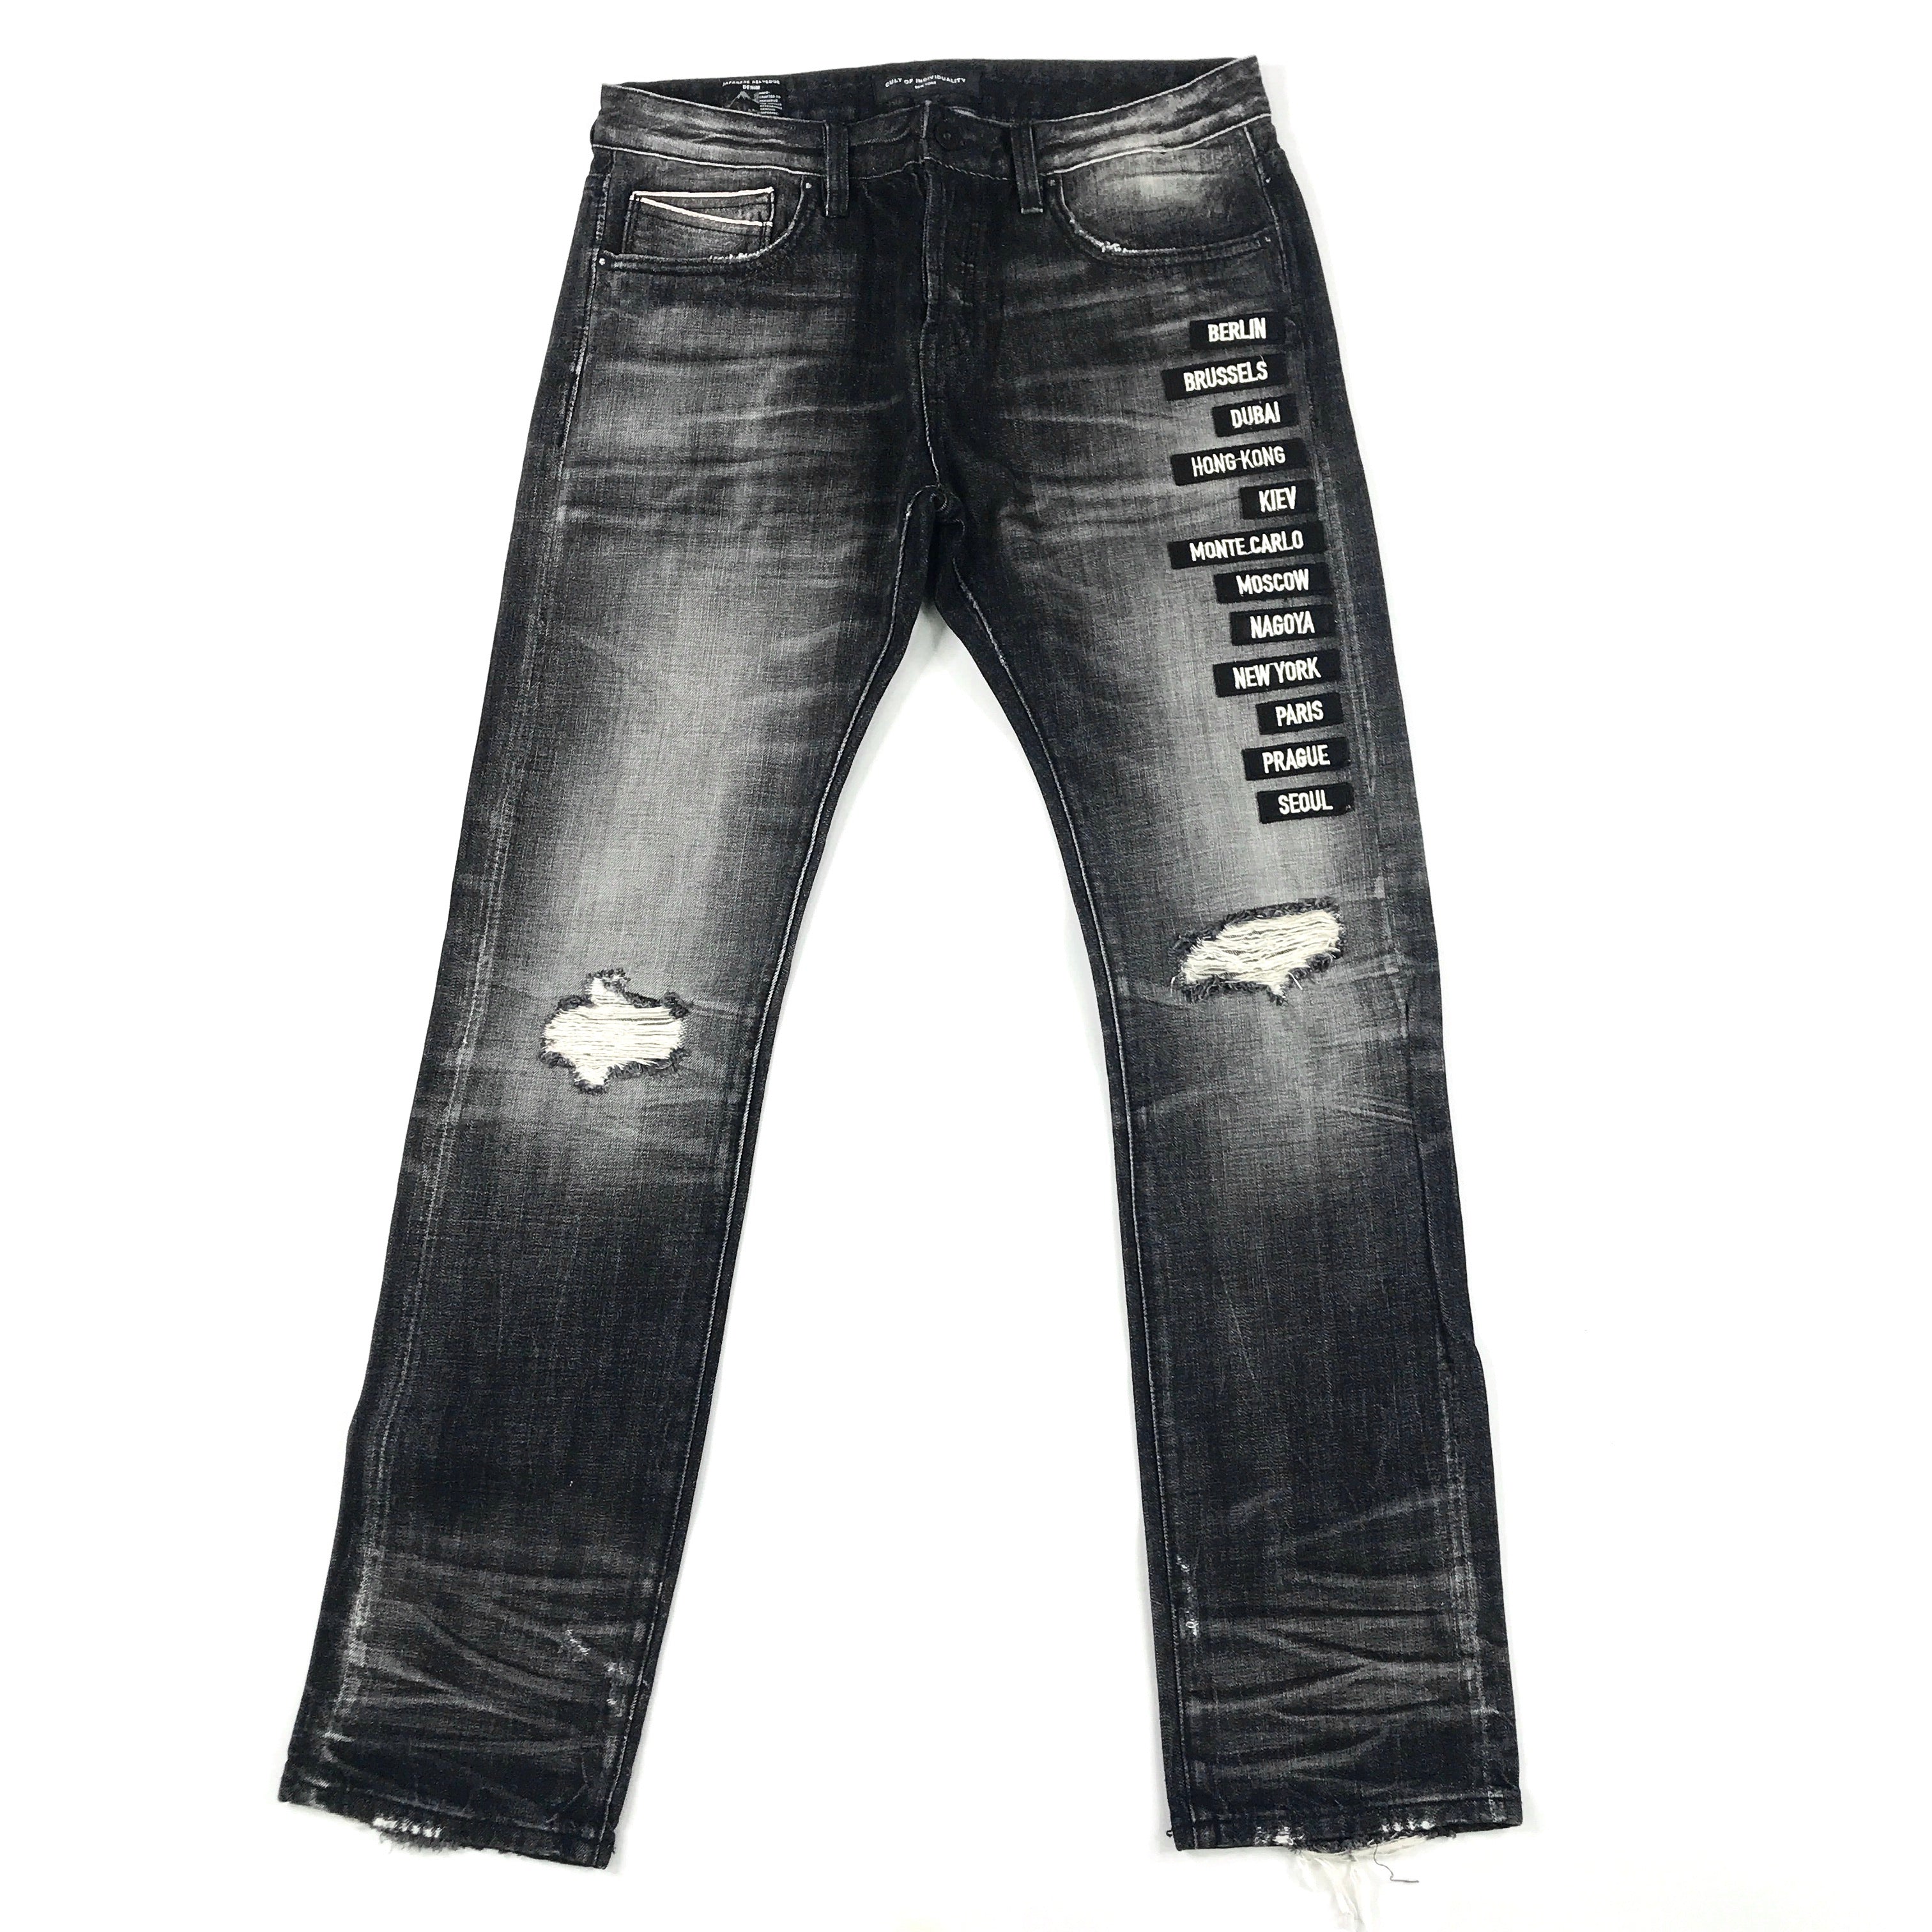 Cult greaser slim straight jeans in global